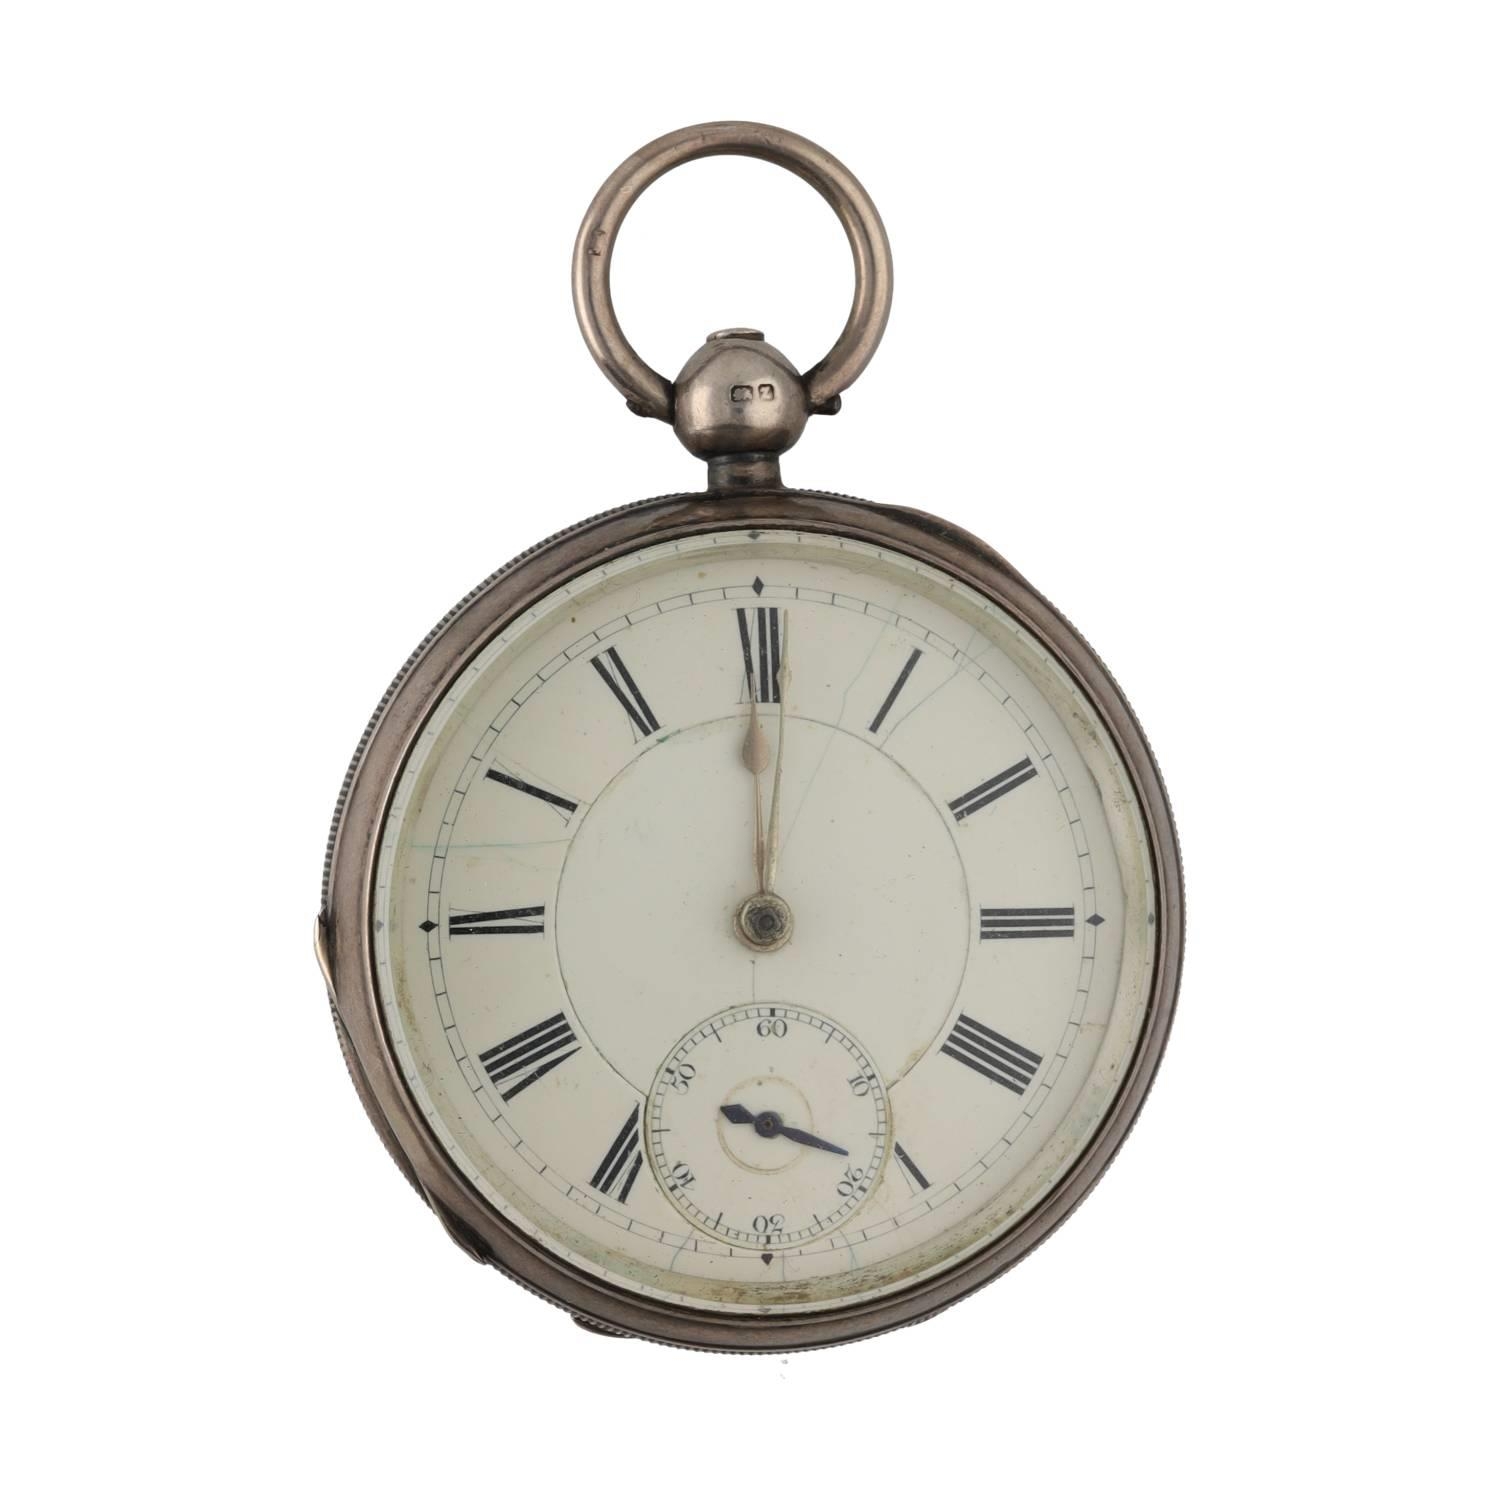 American Waltham 'The Farringdon H.' silver lever pocket watch, circa 1886, serial no. 3365987, with